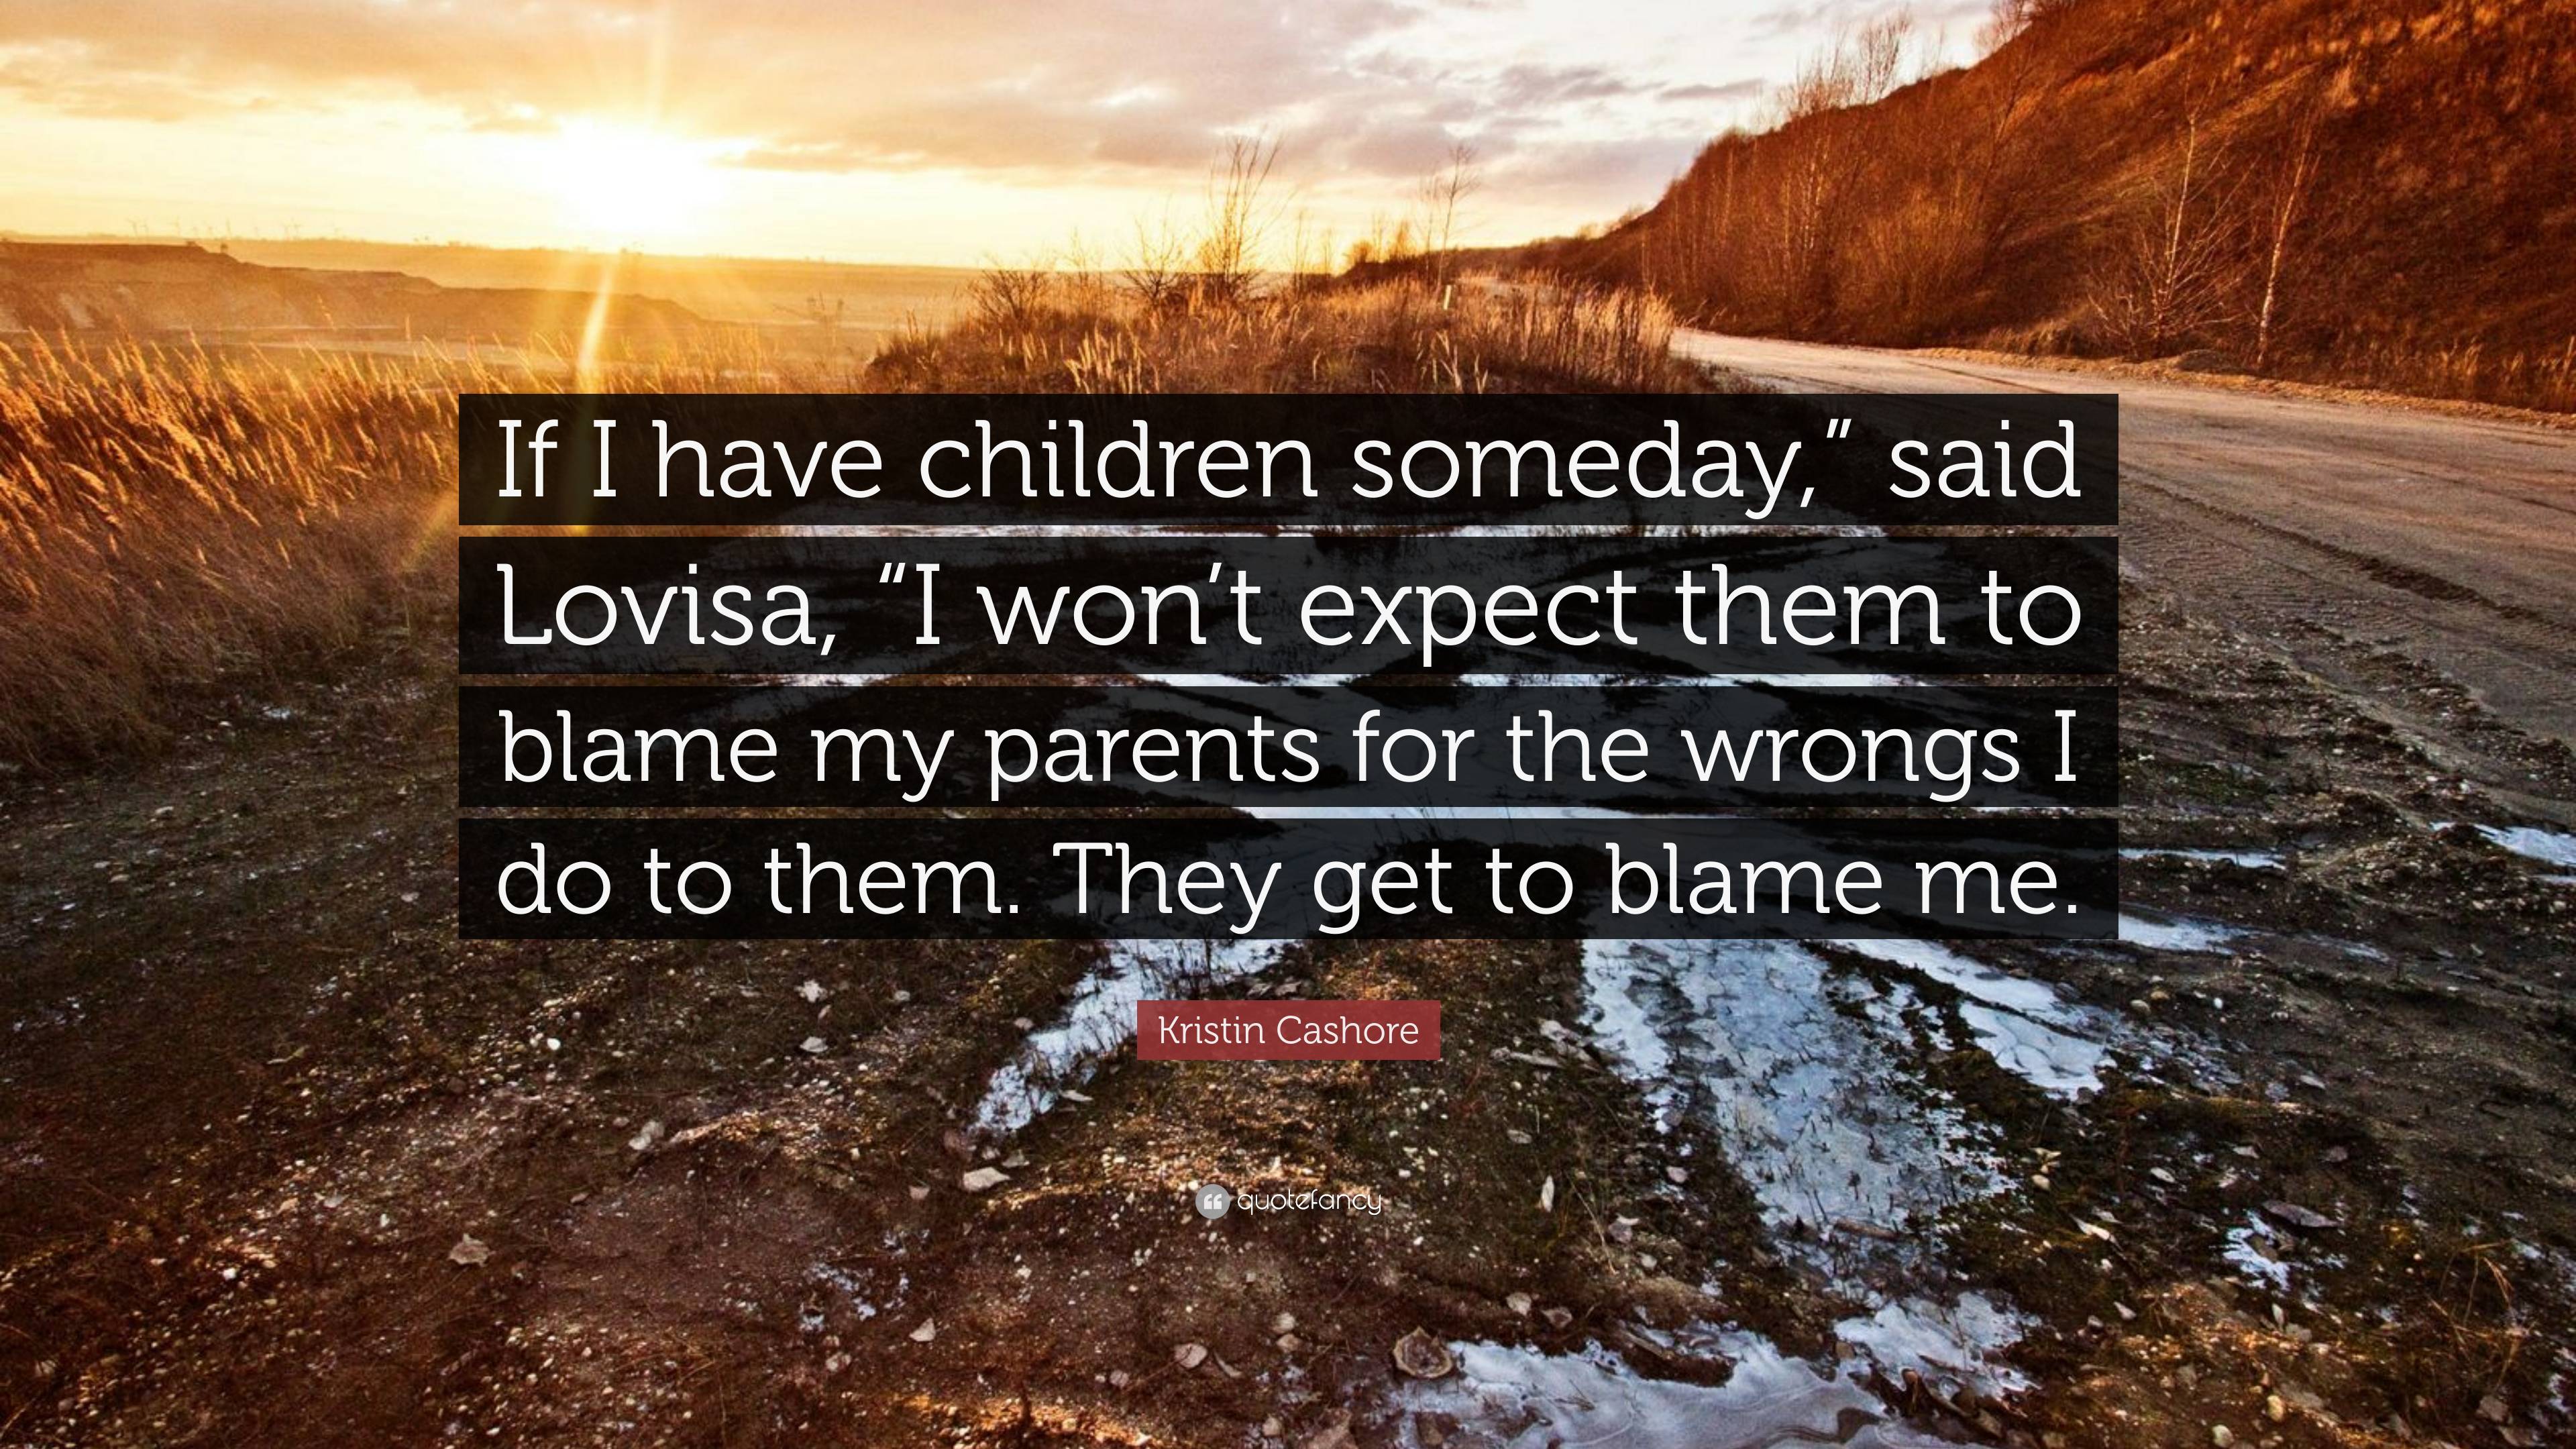 Kristin Cashore Quote: “If I have children someday,” said Lovisa, “I won't  expect them to blame my parents for the wrongs I do to them. They get”